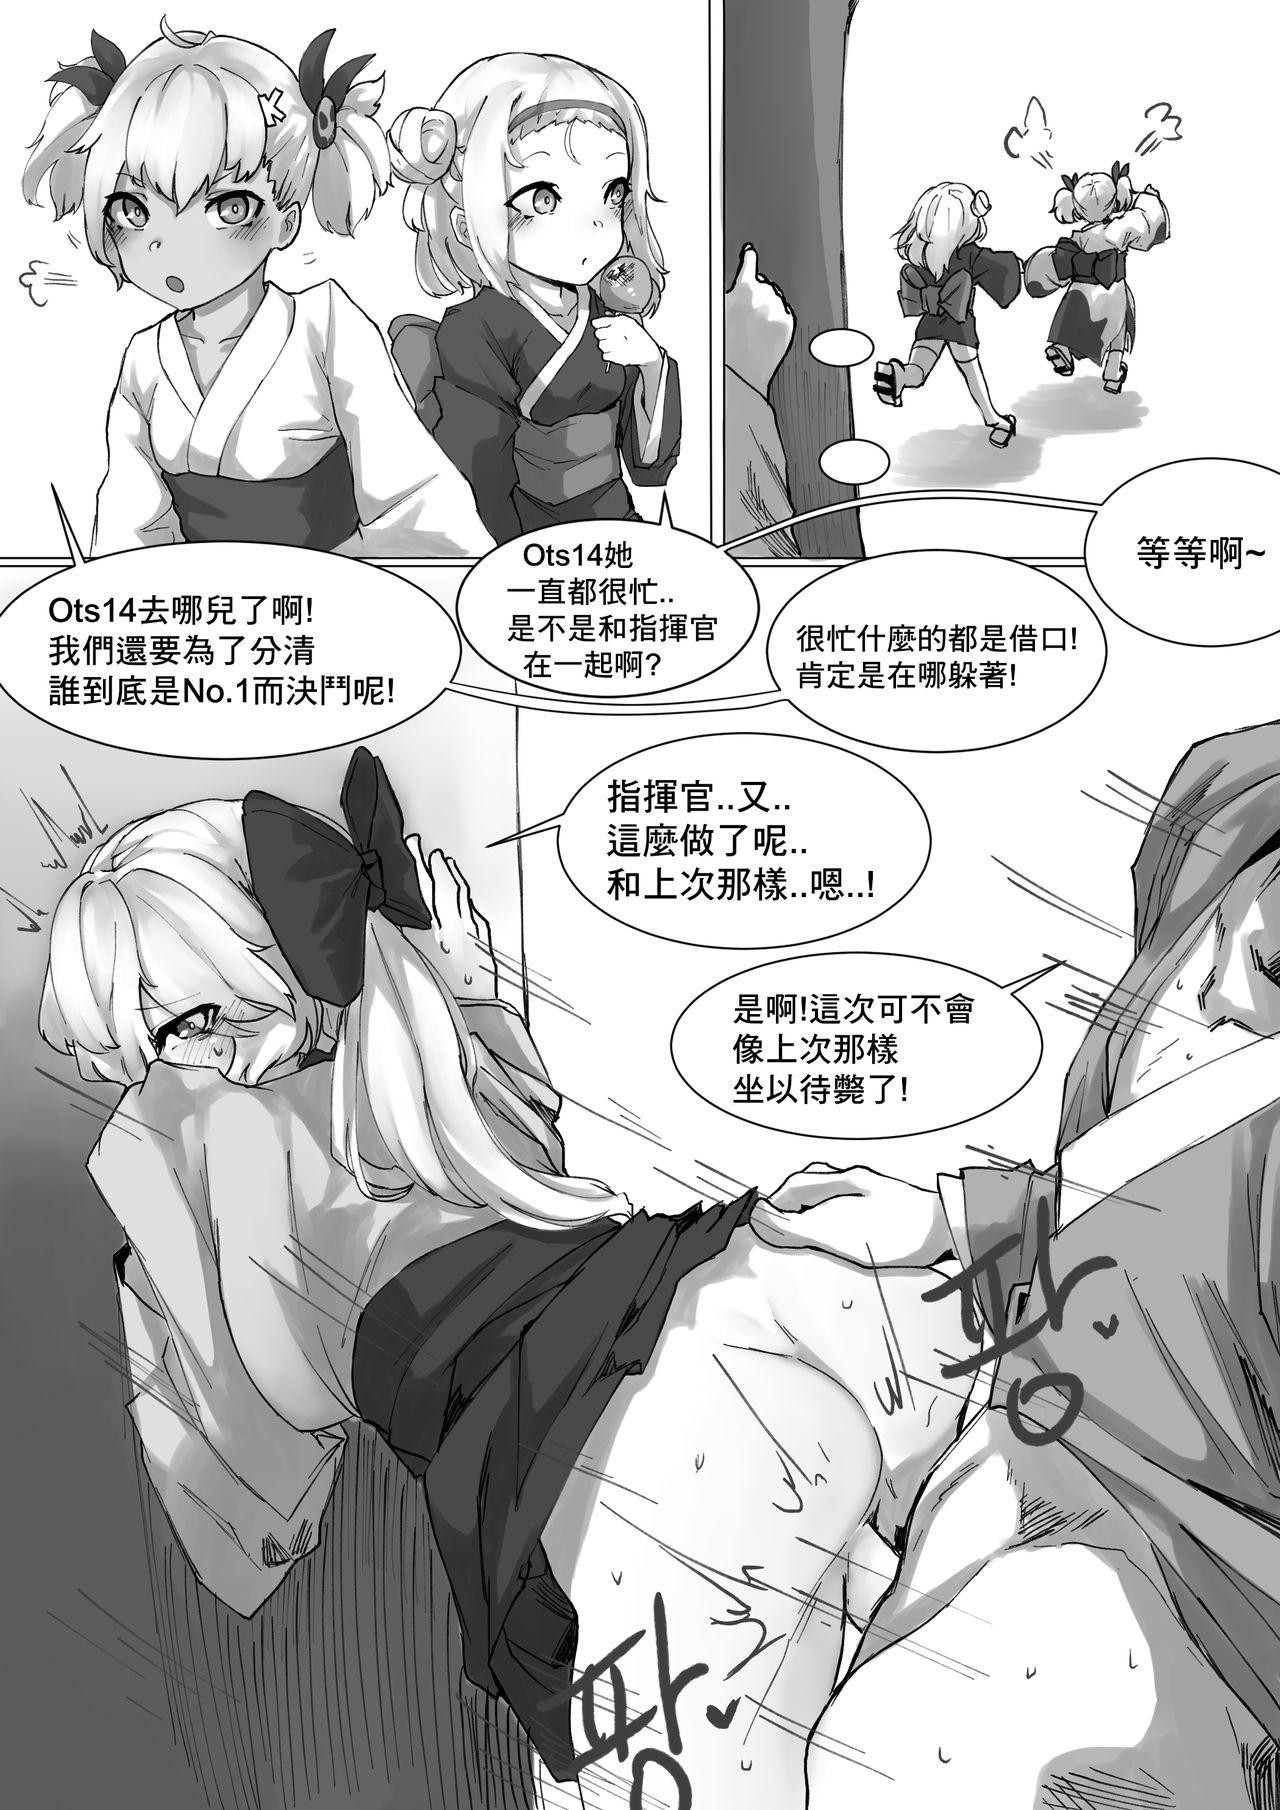 Athletic How To Use OTS-14 - Girls frontline Wet Cunt - Page 10